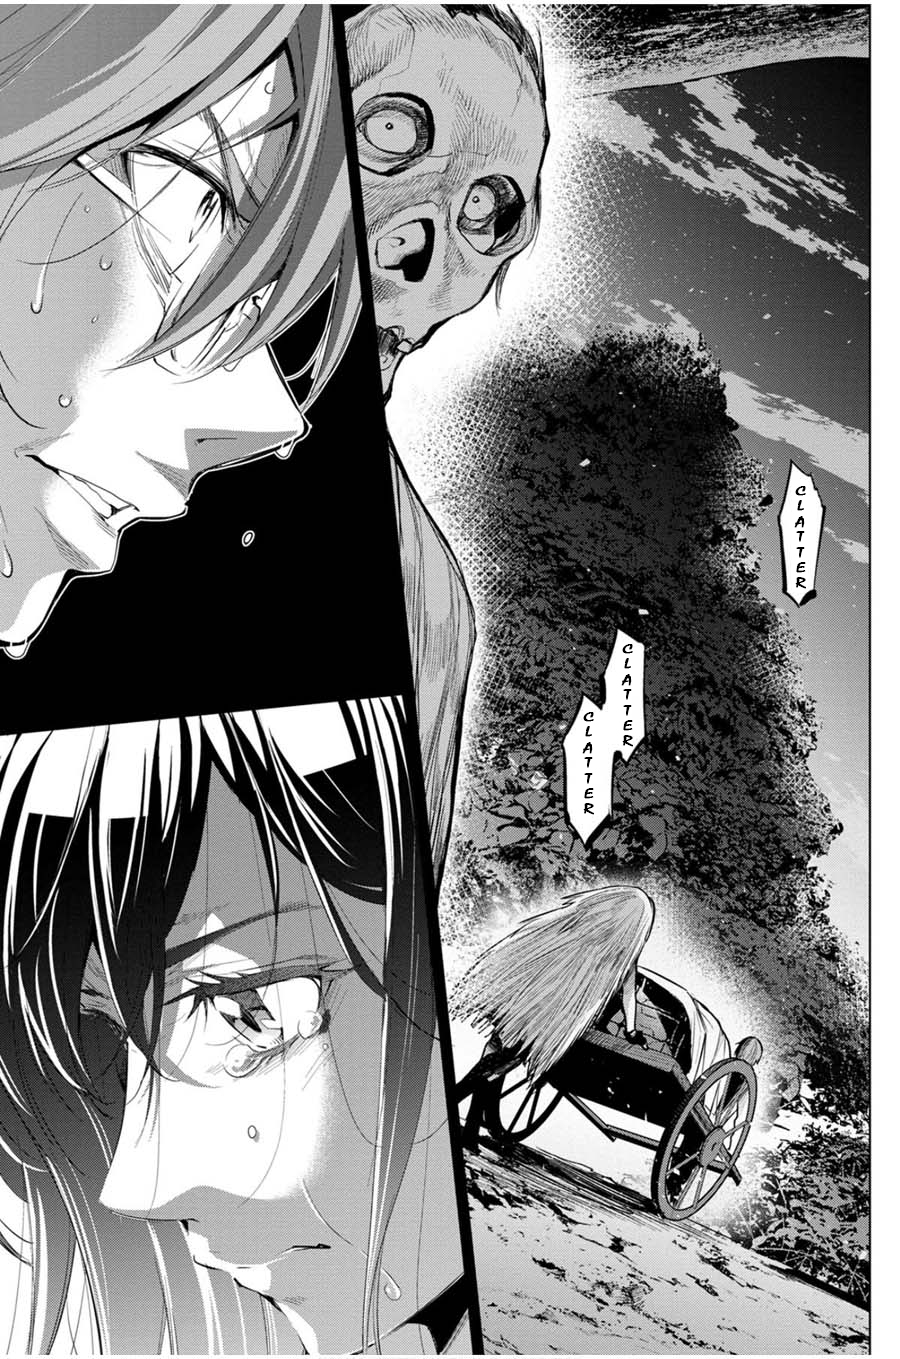 Ingoshima Vol. 3 Ch. 23 Where There's a Will There's a Way